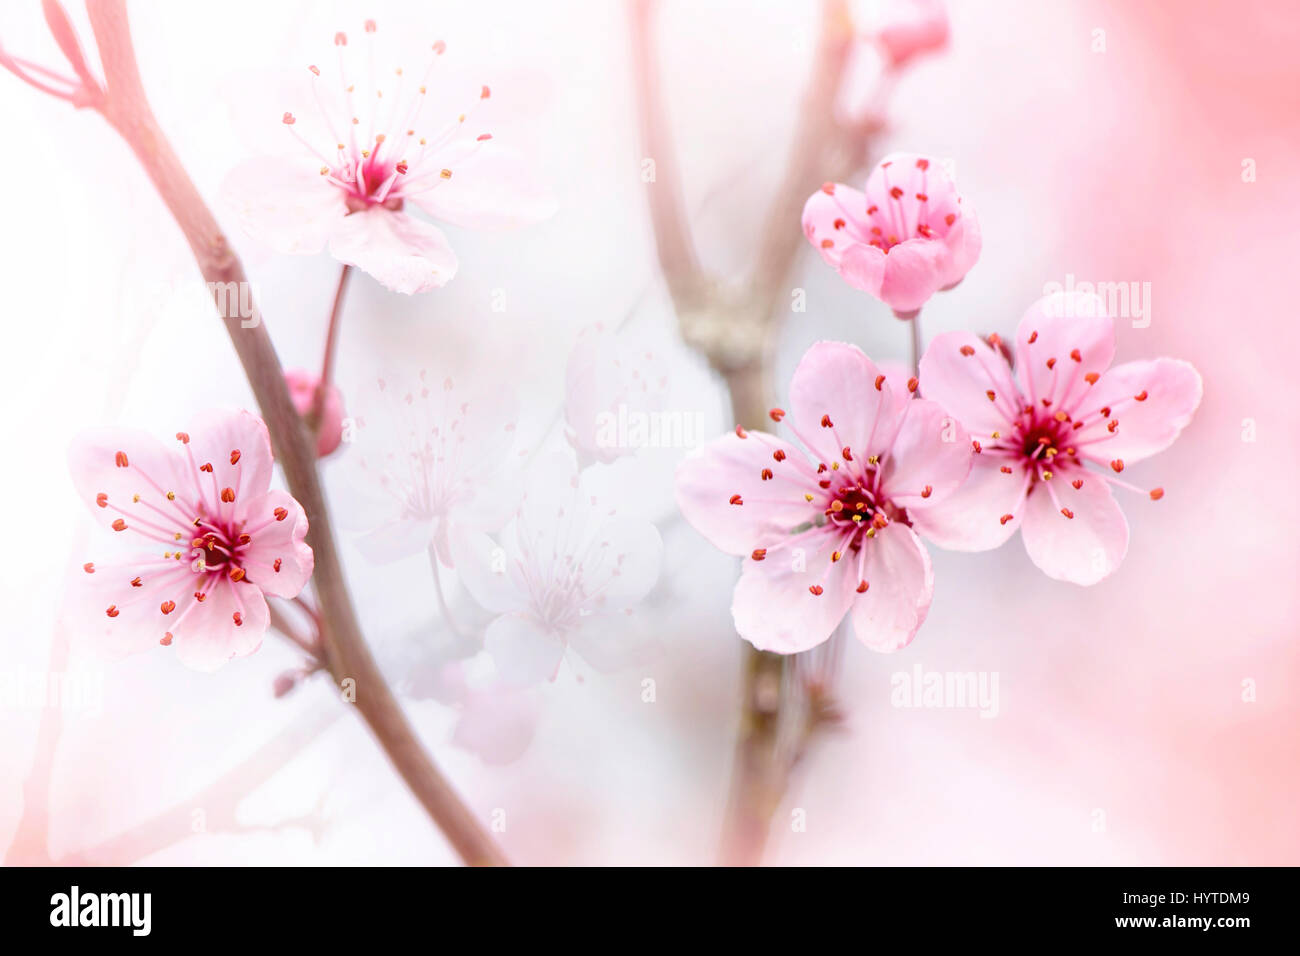 Close-up, creative image of the delicate pink spring blossom of the Black Cherry Plum Tree also known as Prunus Cerasifera Nigra. Stock Photo